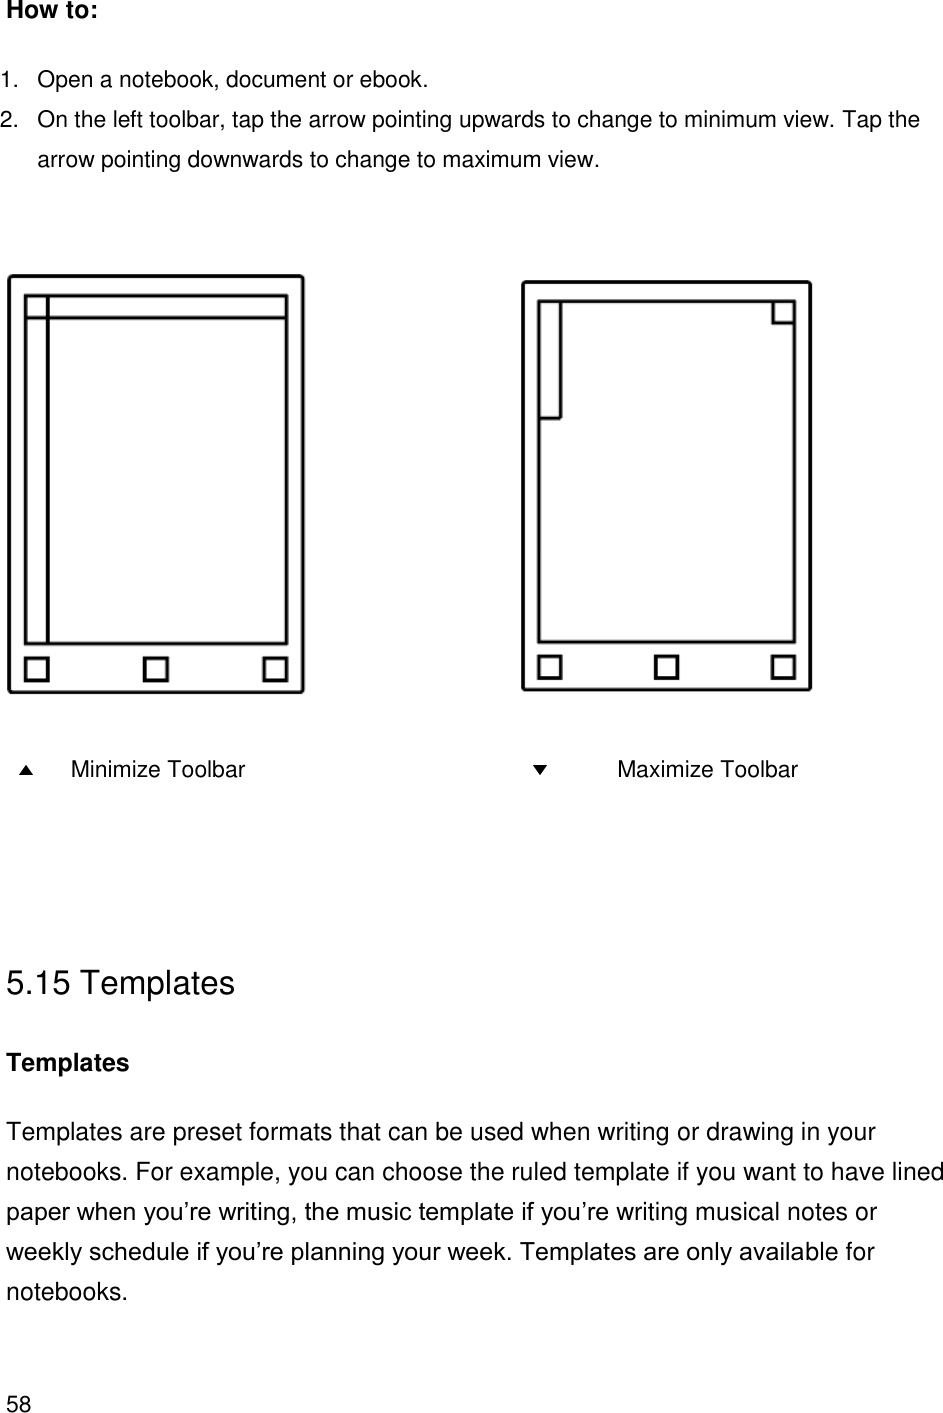 58    How to: 1.  Open a notebook, document or ebook. 2.  On the left toolbar, tap the arrow pointing upwards to change to minimum view. Tap the arrow pointing downwards to change to maximum view.                  Minimize Toolbar                    Maximize Toolbar    5.15 Templates  Templates Templates are preset formats that can be used when writing or drawing in your notebooks. For example, you can choose the ruled template if you want to have lined paper when you’re writing, the music template if you’re writing musical notes or weekly schedule if you’re planning your week. Templates are only available for notebooks.    